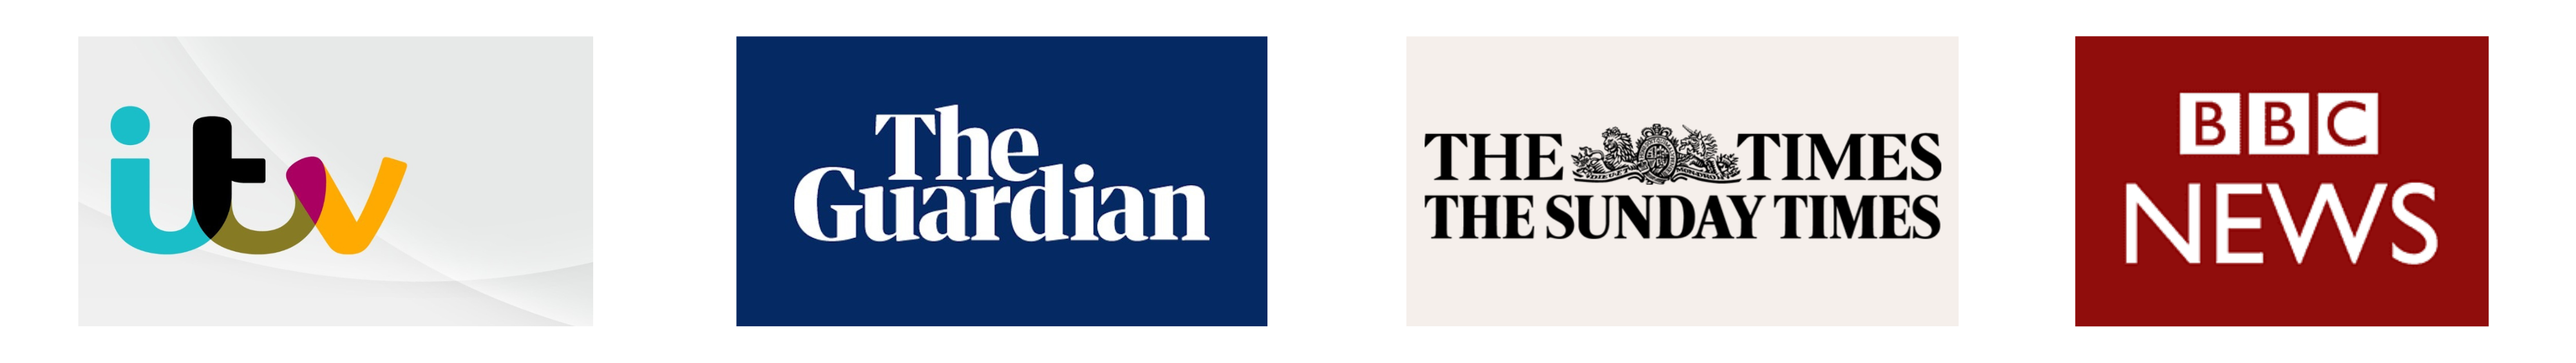 Logos for ITV, The Guardian, The Times, and BBC News